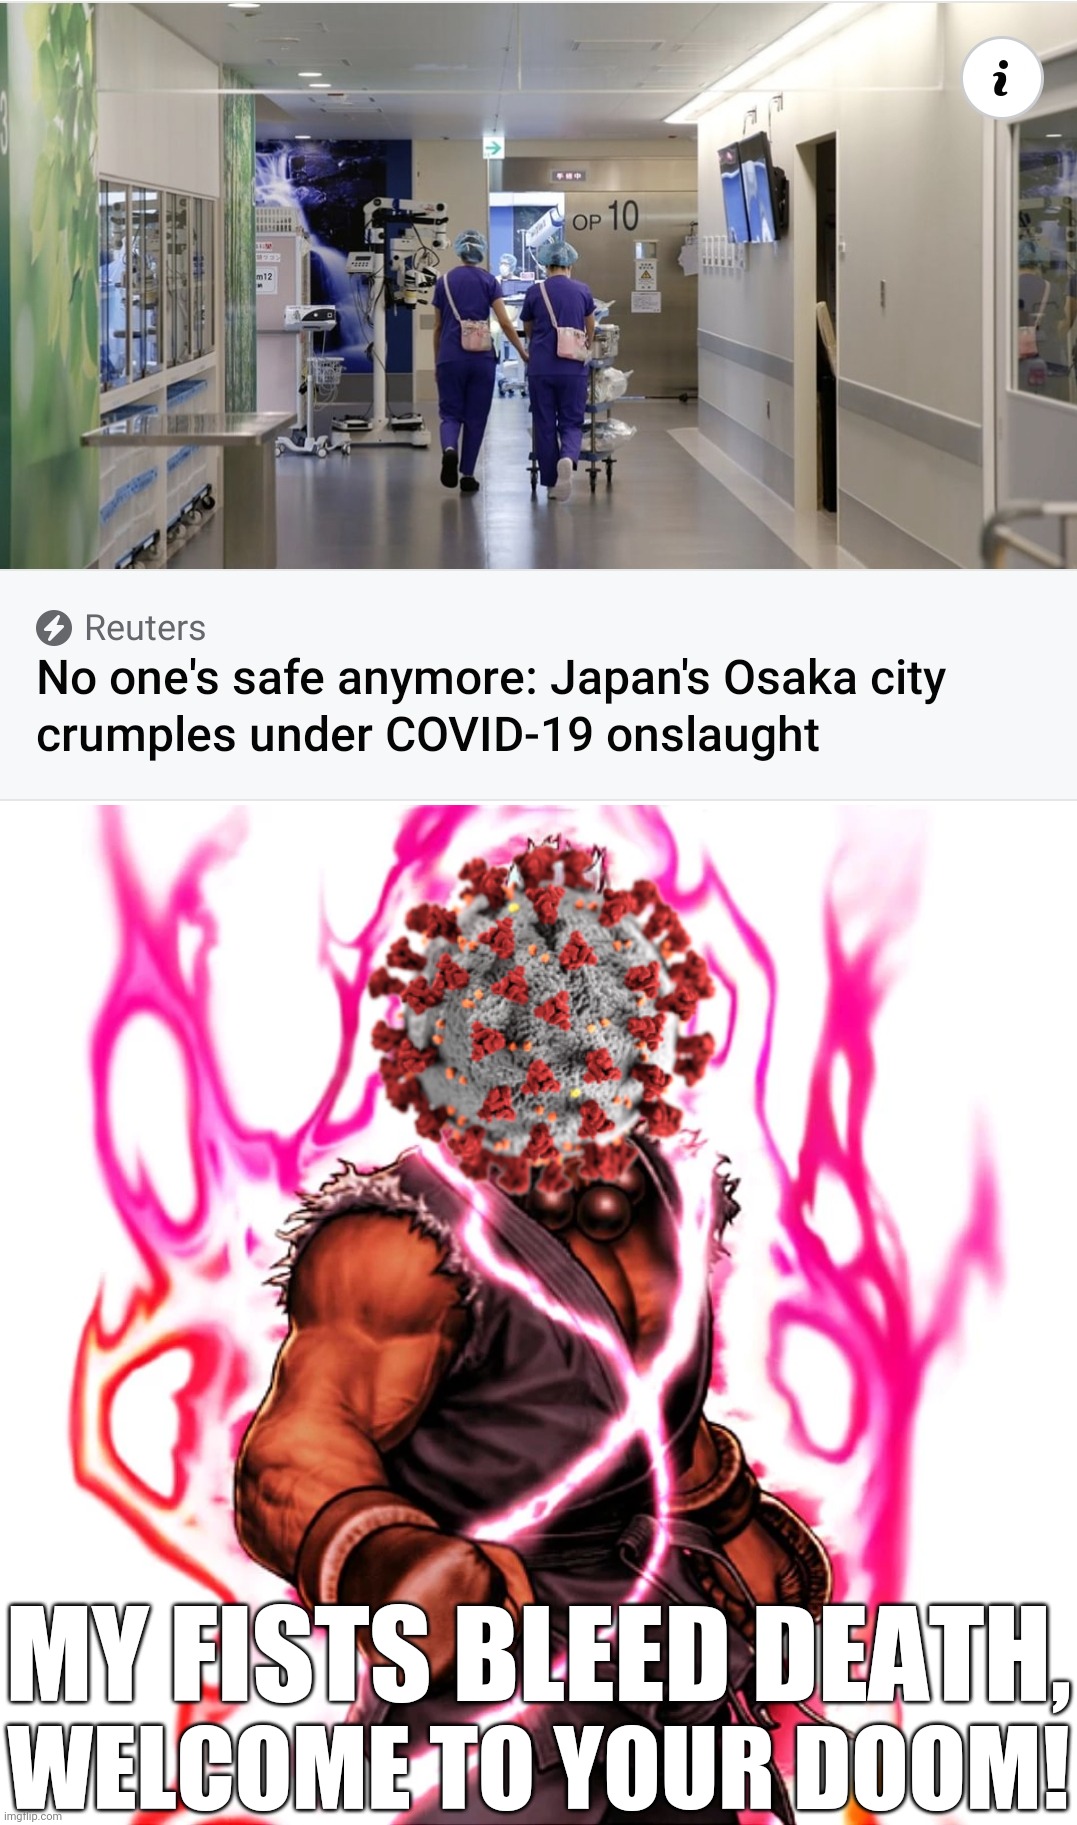 Nobody is safe... | MY FISTS BLEED DEATH, WELCOME TO YOUR DOOM! | image tagged in akuma smile,coronavirus,covid-19,osaka,so sad,memes | made w/ Imgflip meme maker